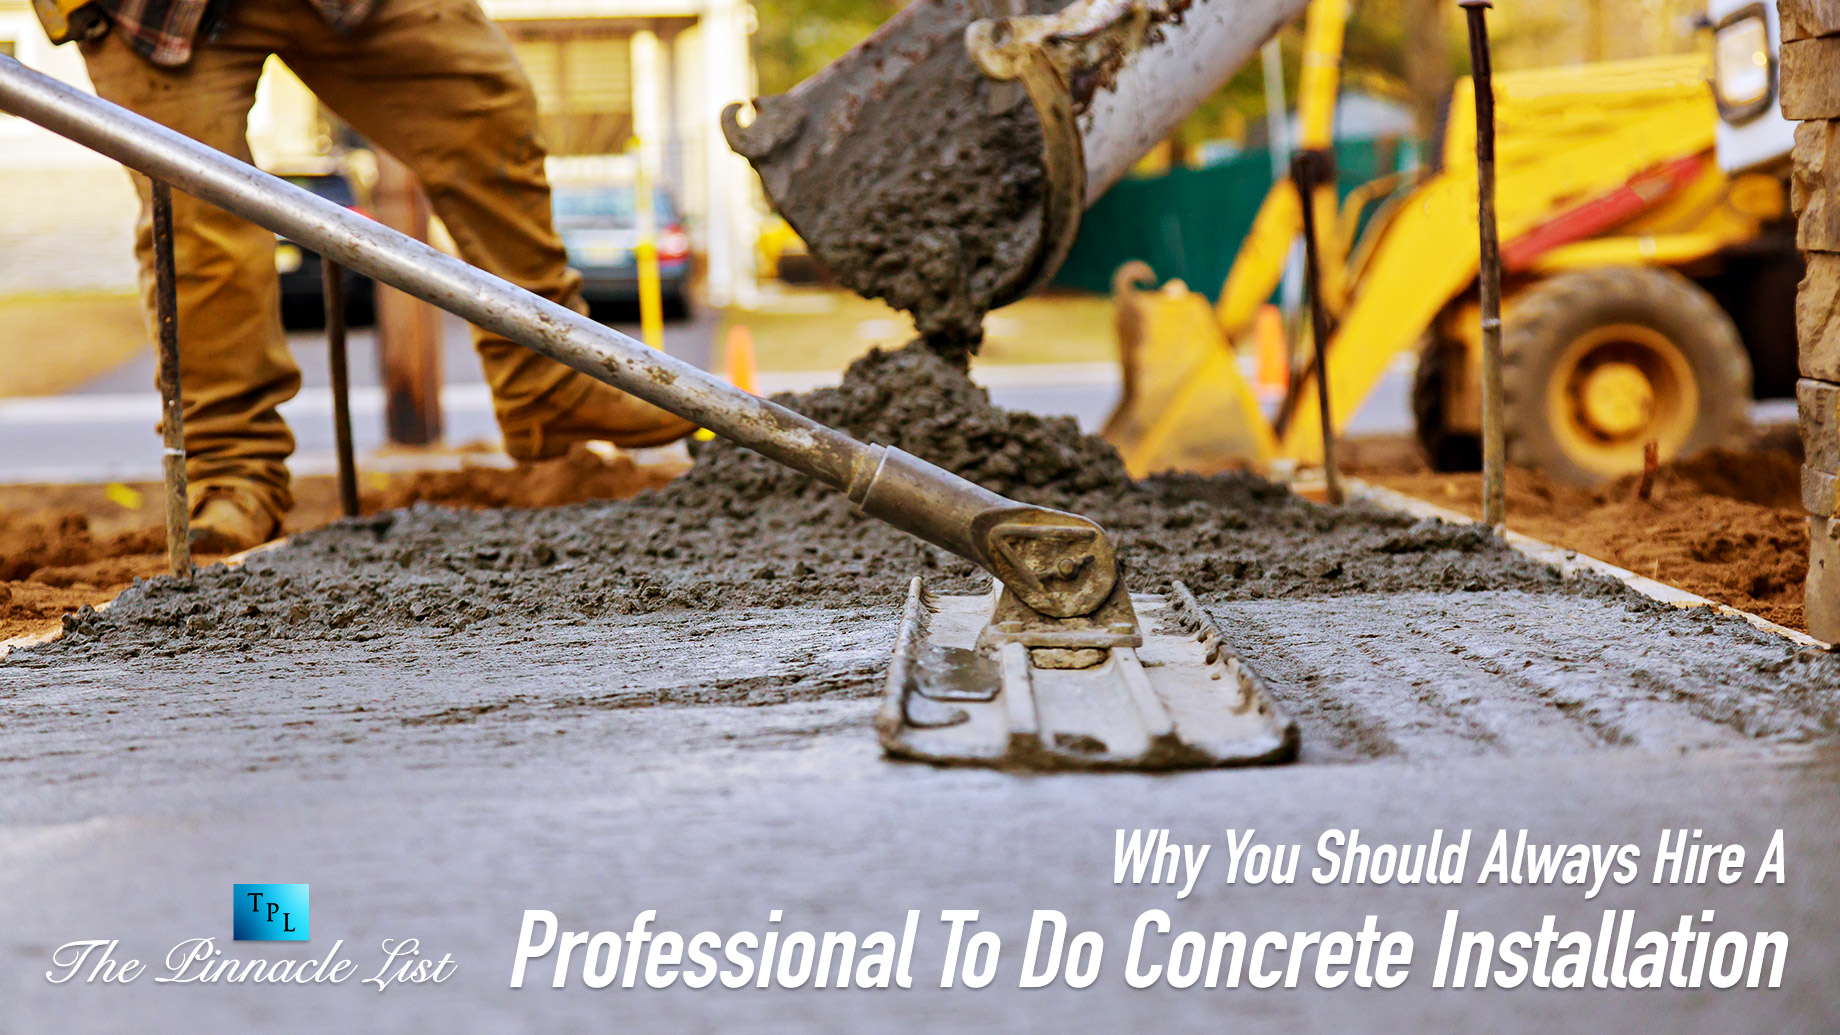 Why You Should Always Hire A Professional To Do Concrete Installation